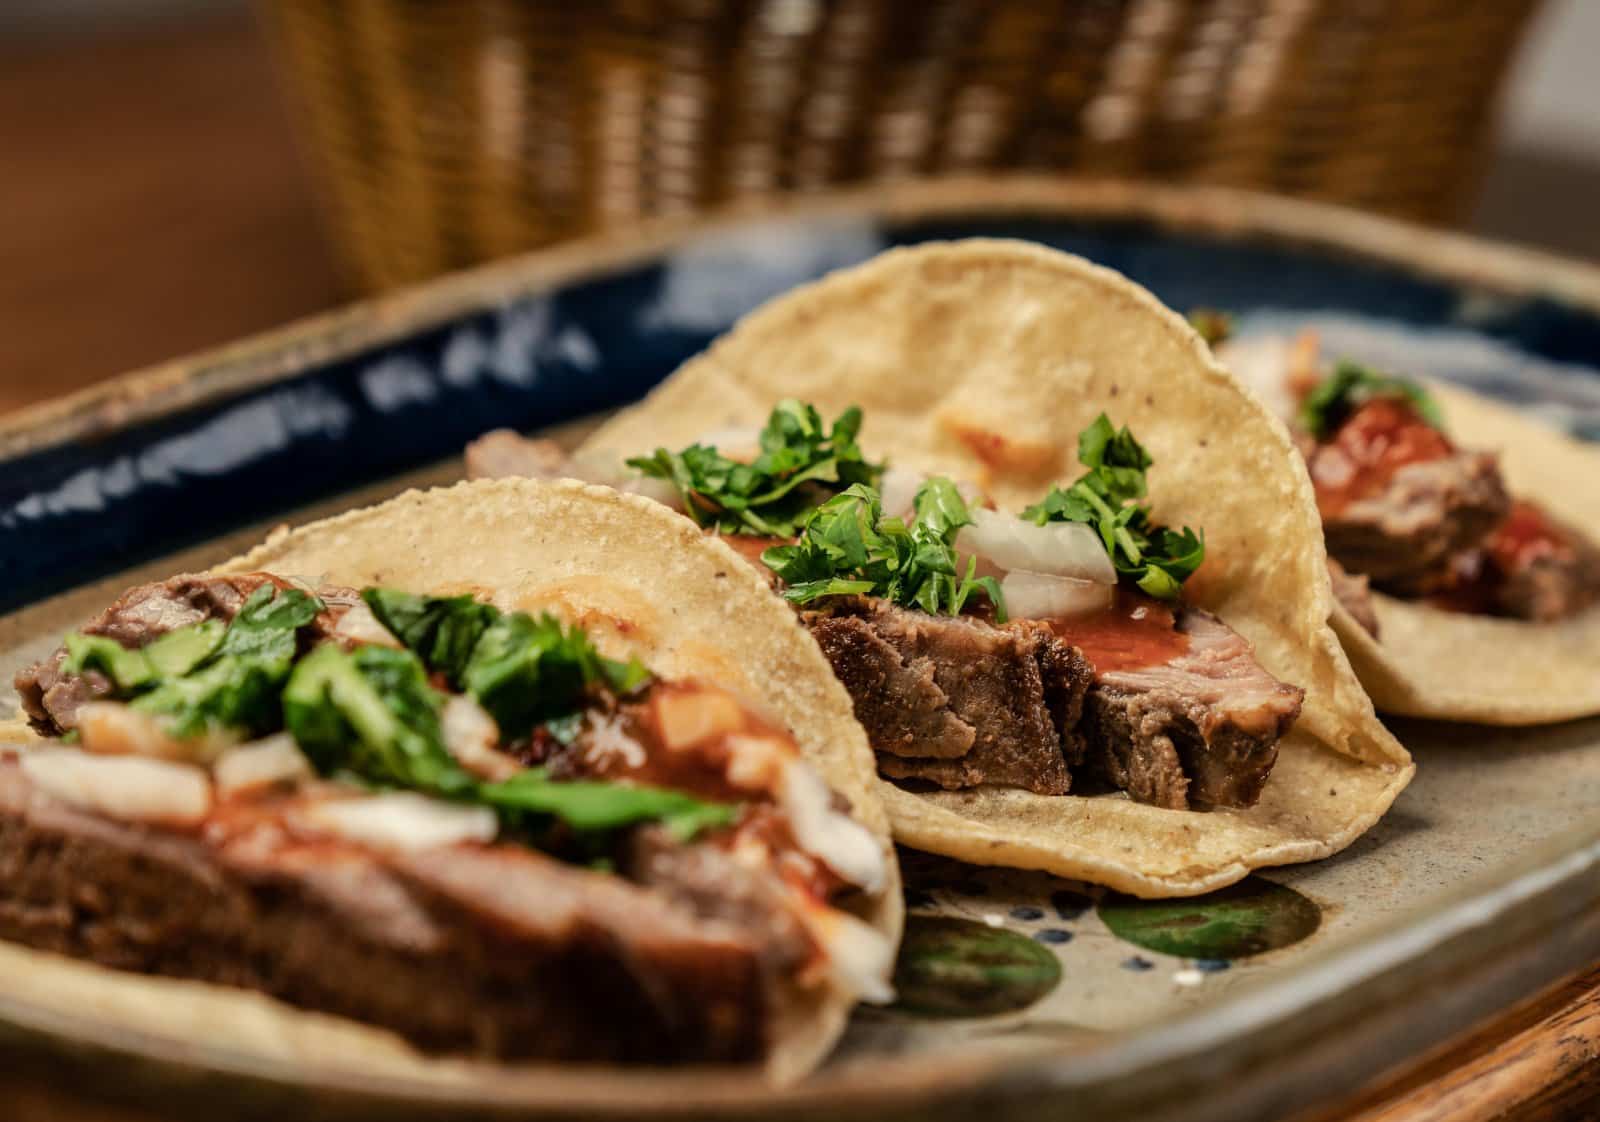 Image Credit: Pexels / Los Muertos Crew <p><span>Dive into the vibrant culinary scene of Mexico City, where street food reigns supreme. Feast on mouthwatering tacos al pastor, tamales, and chilaquiles while soaking in the city’s vibrant atmosphere. Explore local markets like Mercado de la Merced for an authentic taste of Mexican cuisine.</span></p>